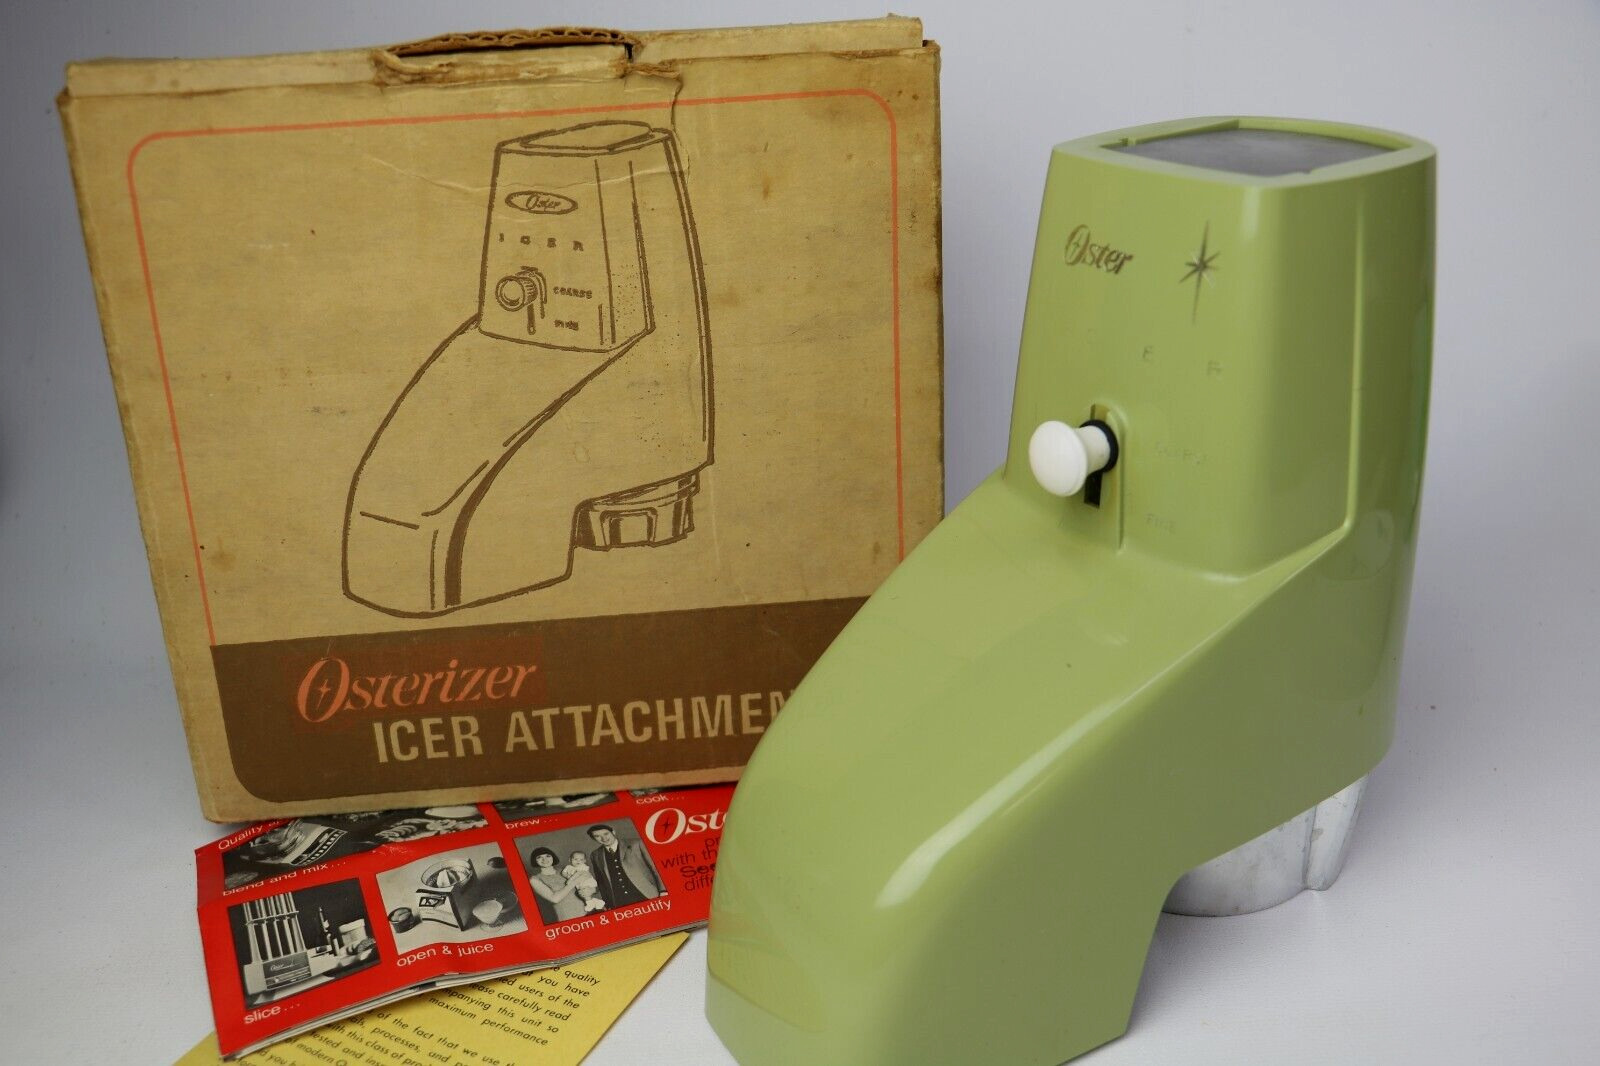 Vintage 70's Osterizer Icer Attachment Model #435 Avocado Green in Box